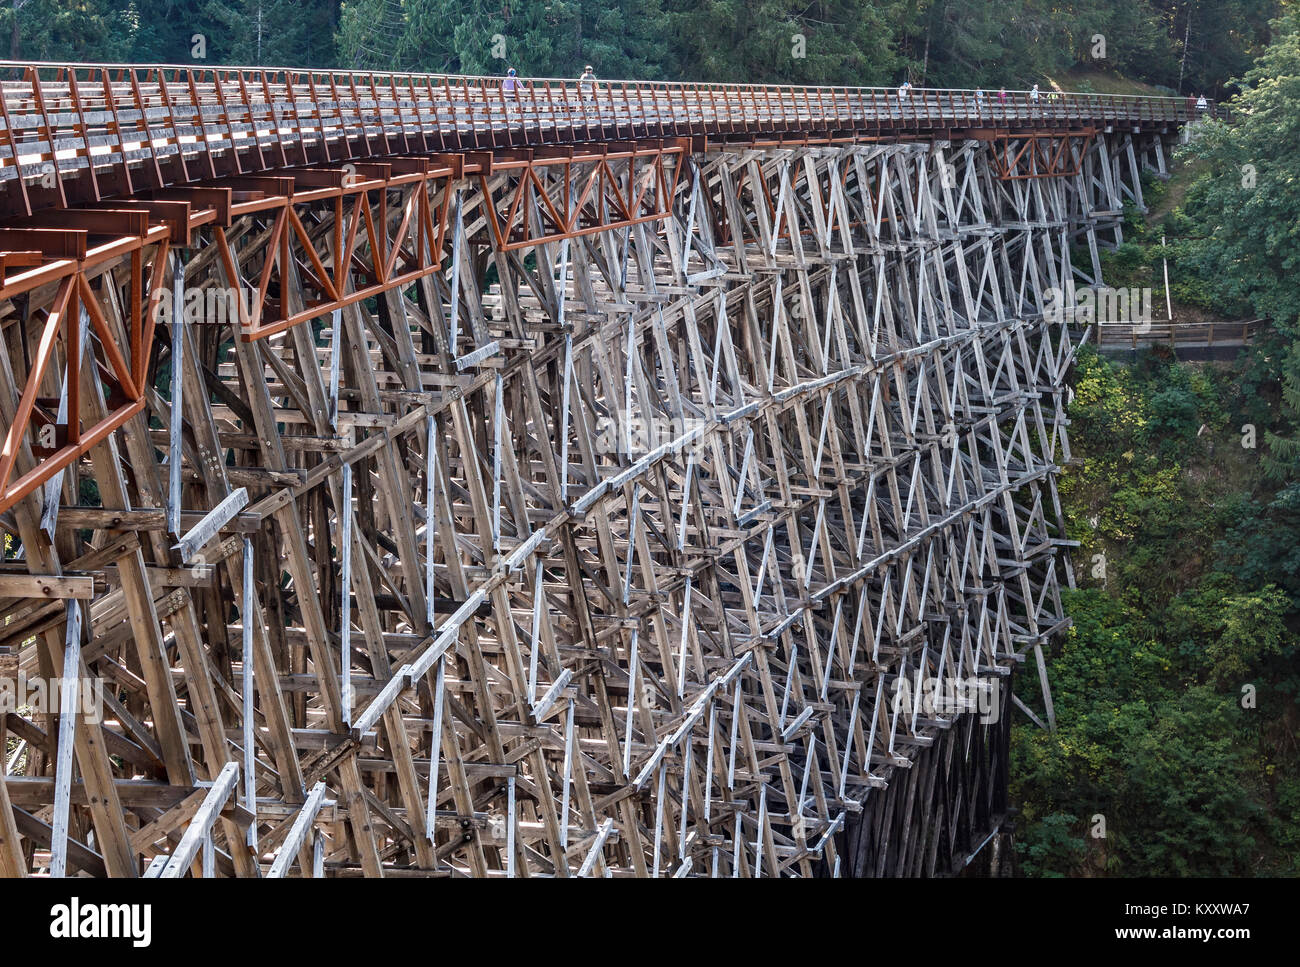 On a summer day cyclists and walkers enjoy Kinsol Trestle, an old railway crossing restored as a popular trail, crossing high over the Koksilah River. Stock Photo